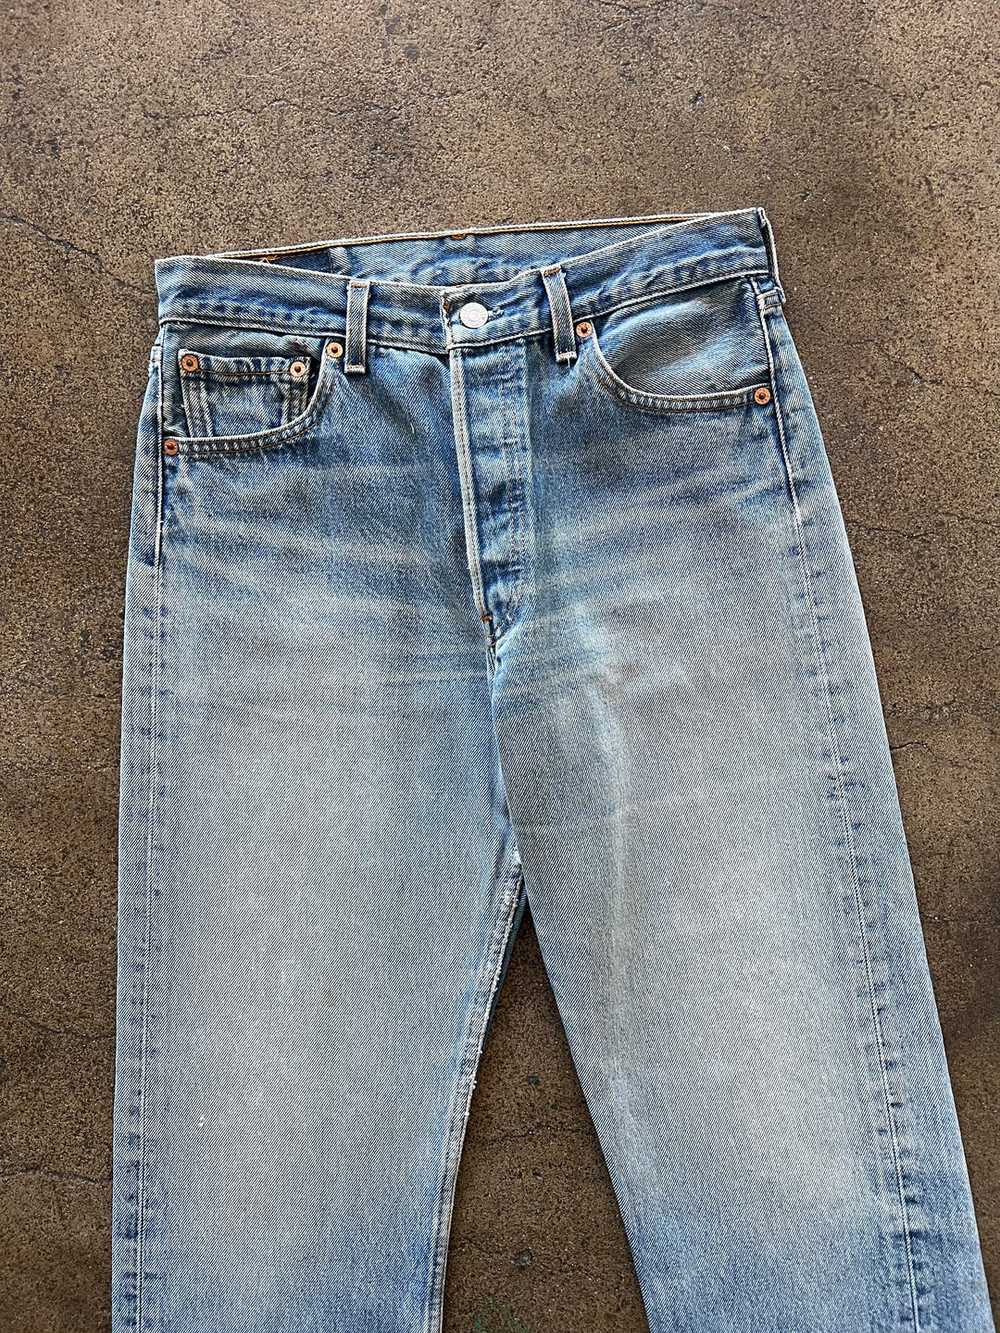 2000s Levi's 501 Jeans Faded 29" x 29" - image 2